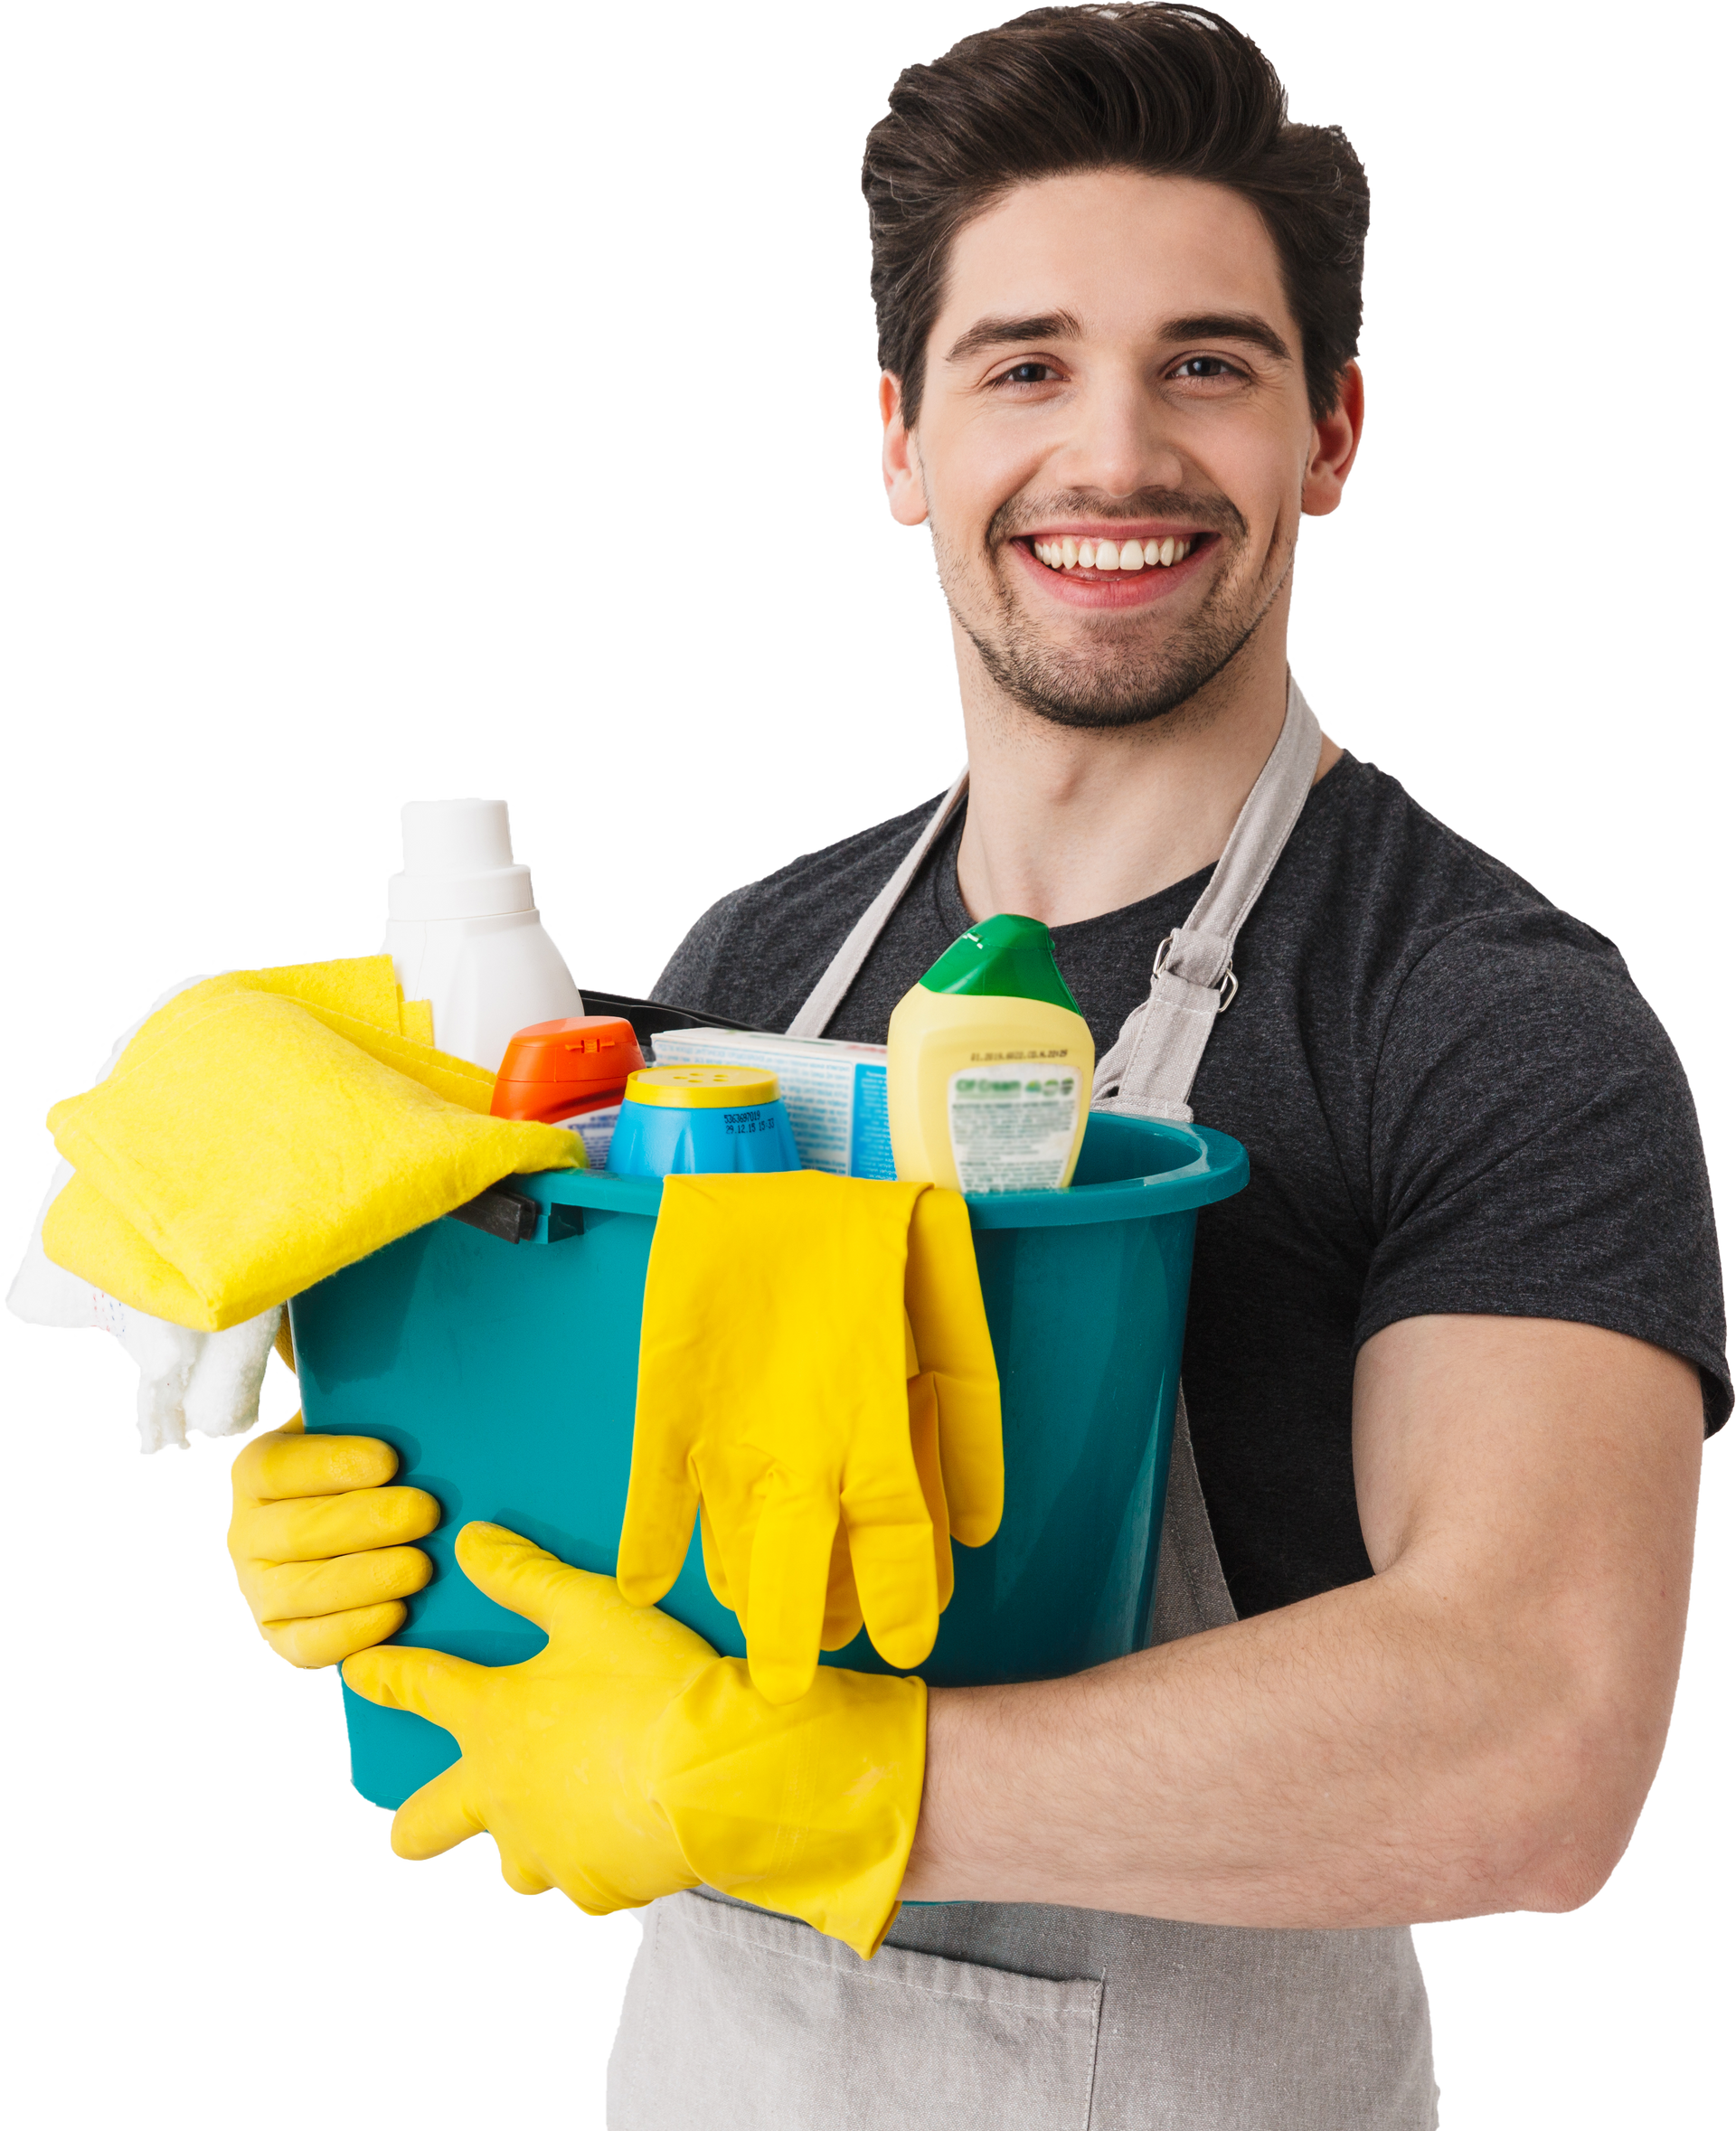 Professional Janitorial Worker Holding a Bucket Full of Cleaning Materials